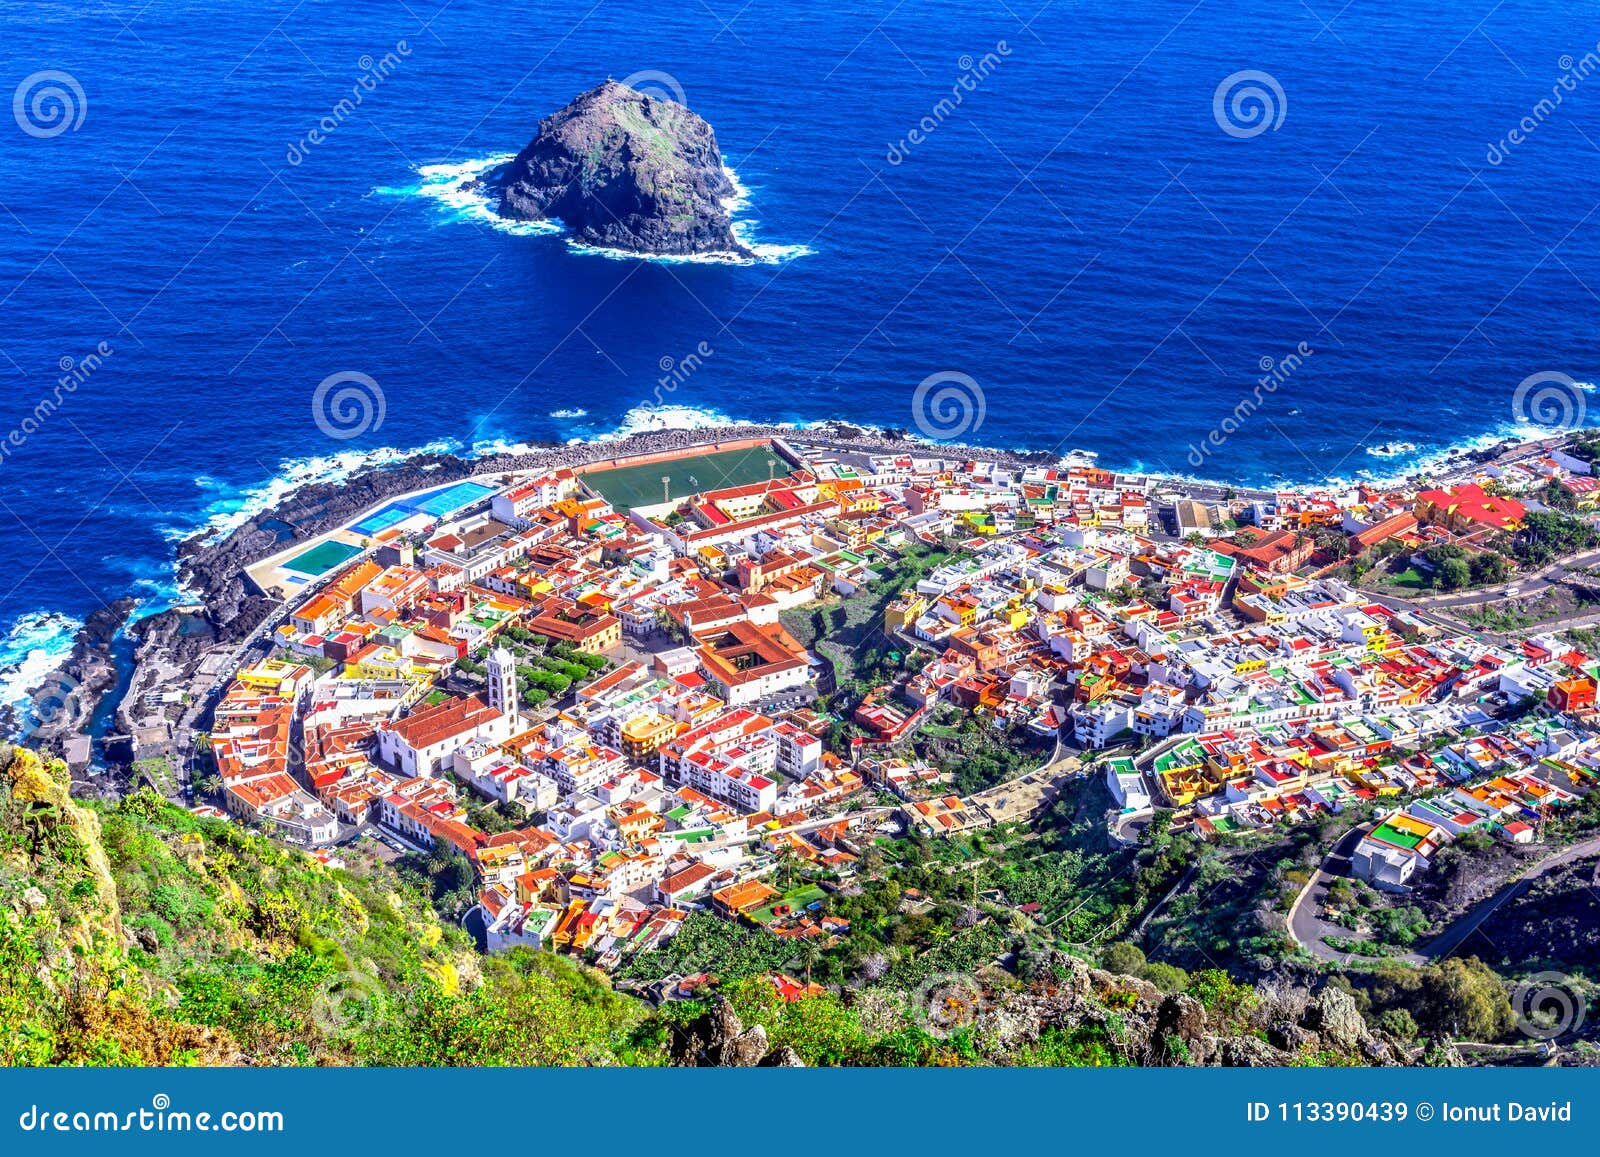 garachico, tenerife, canary islands, spain: overview of the col